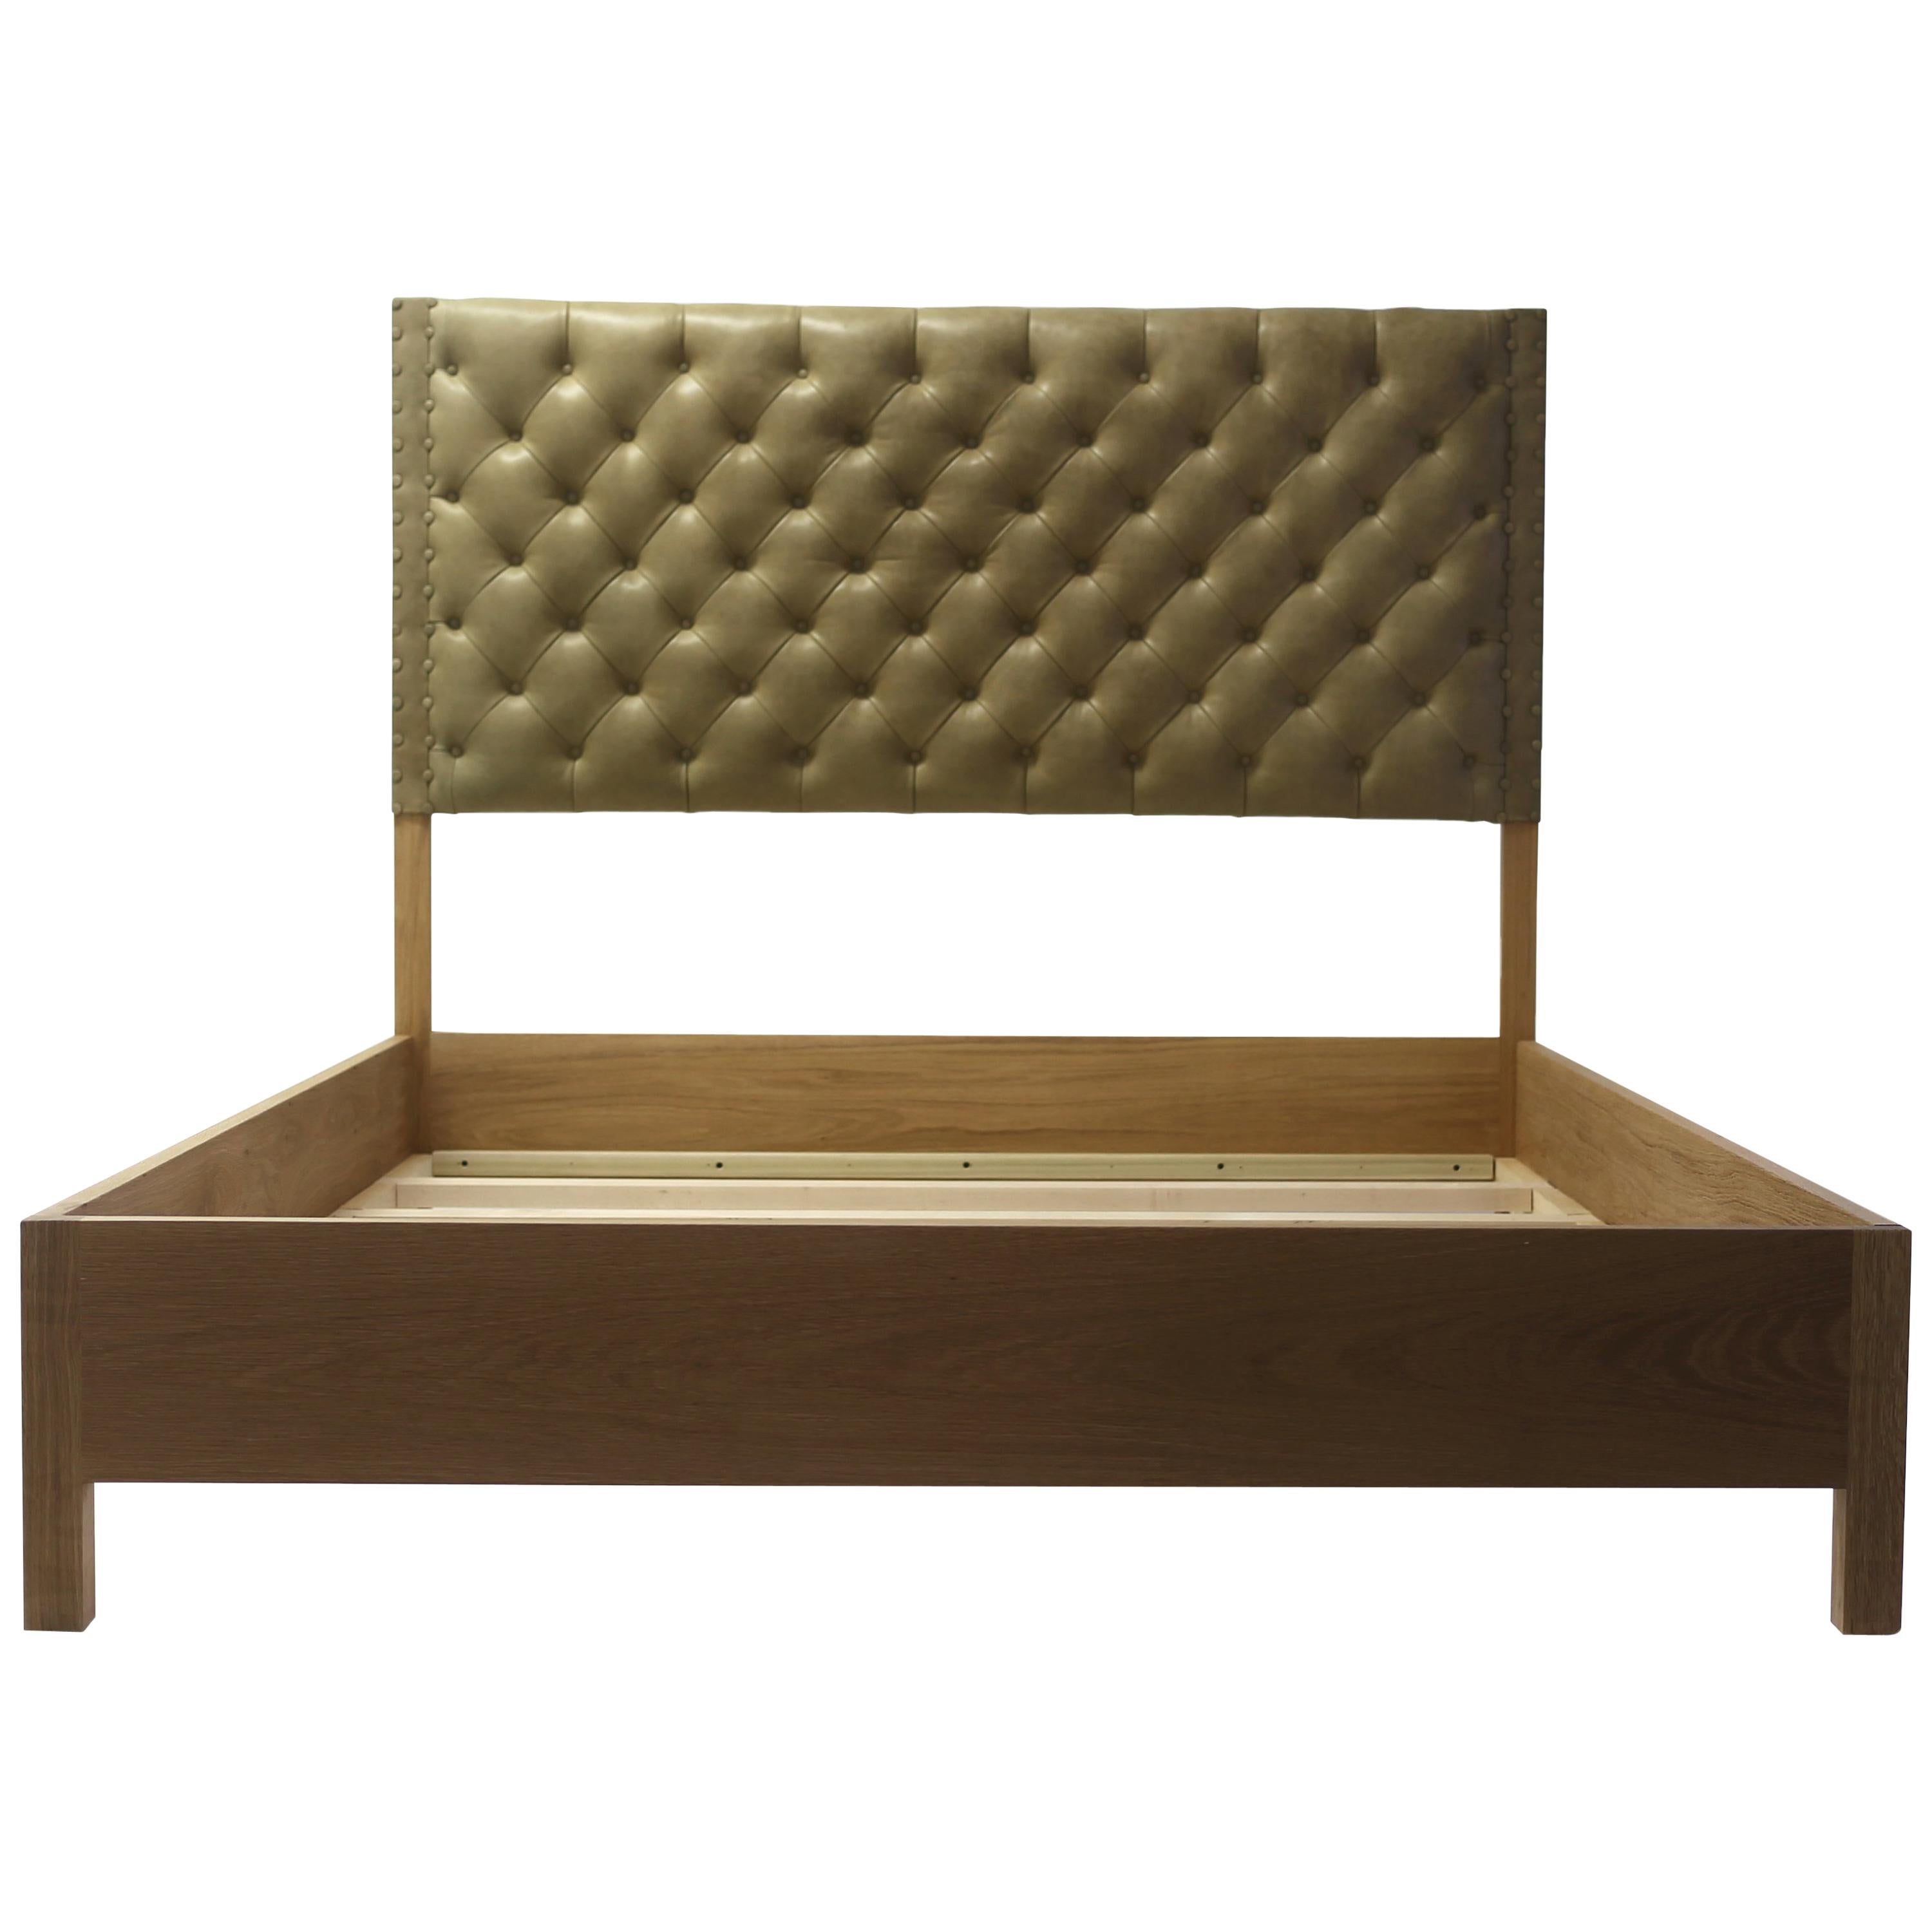 Tan Leather Tufted Bed with Oakwood Rails with Button Details For Sale